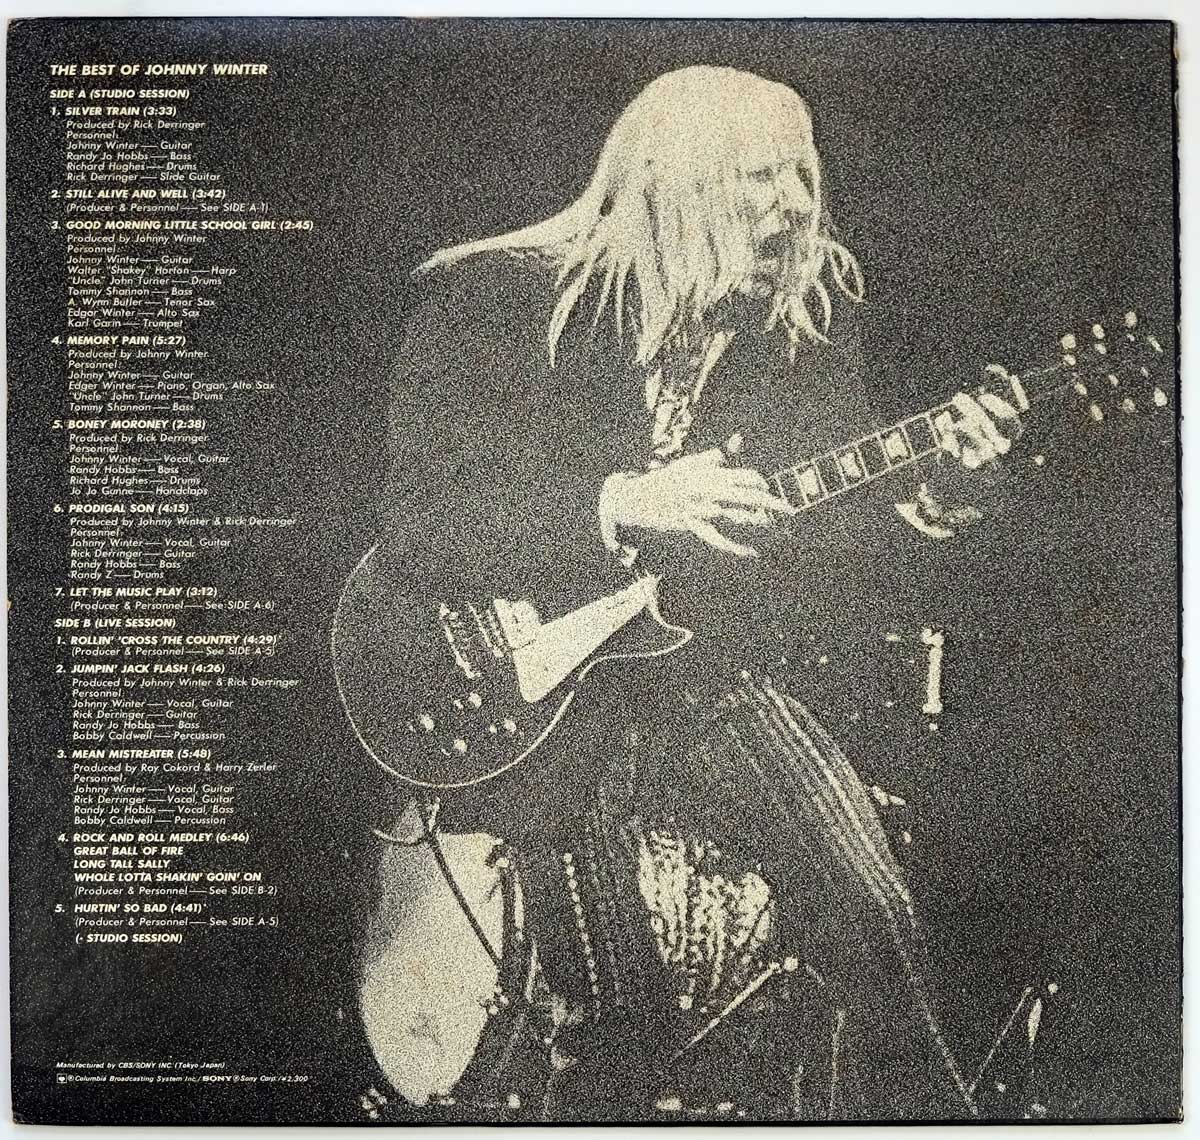 Johnny Winter playing a Gibson Les Paul Guitar on the Album Back Cover  Photo 